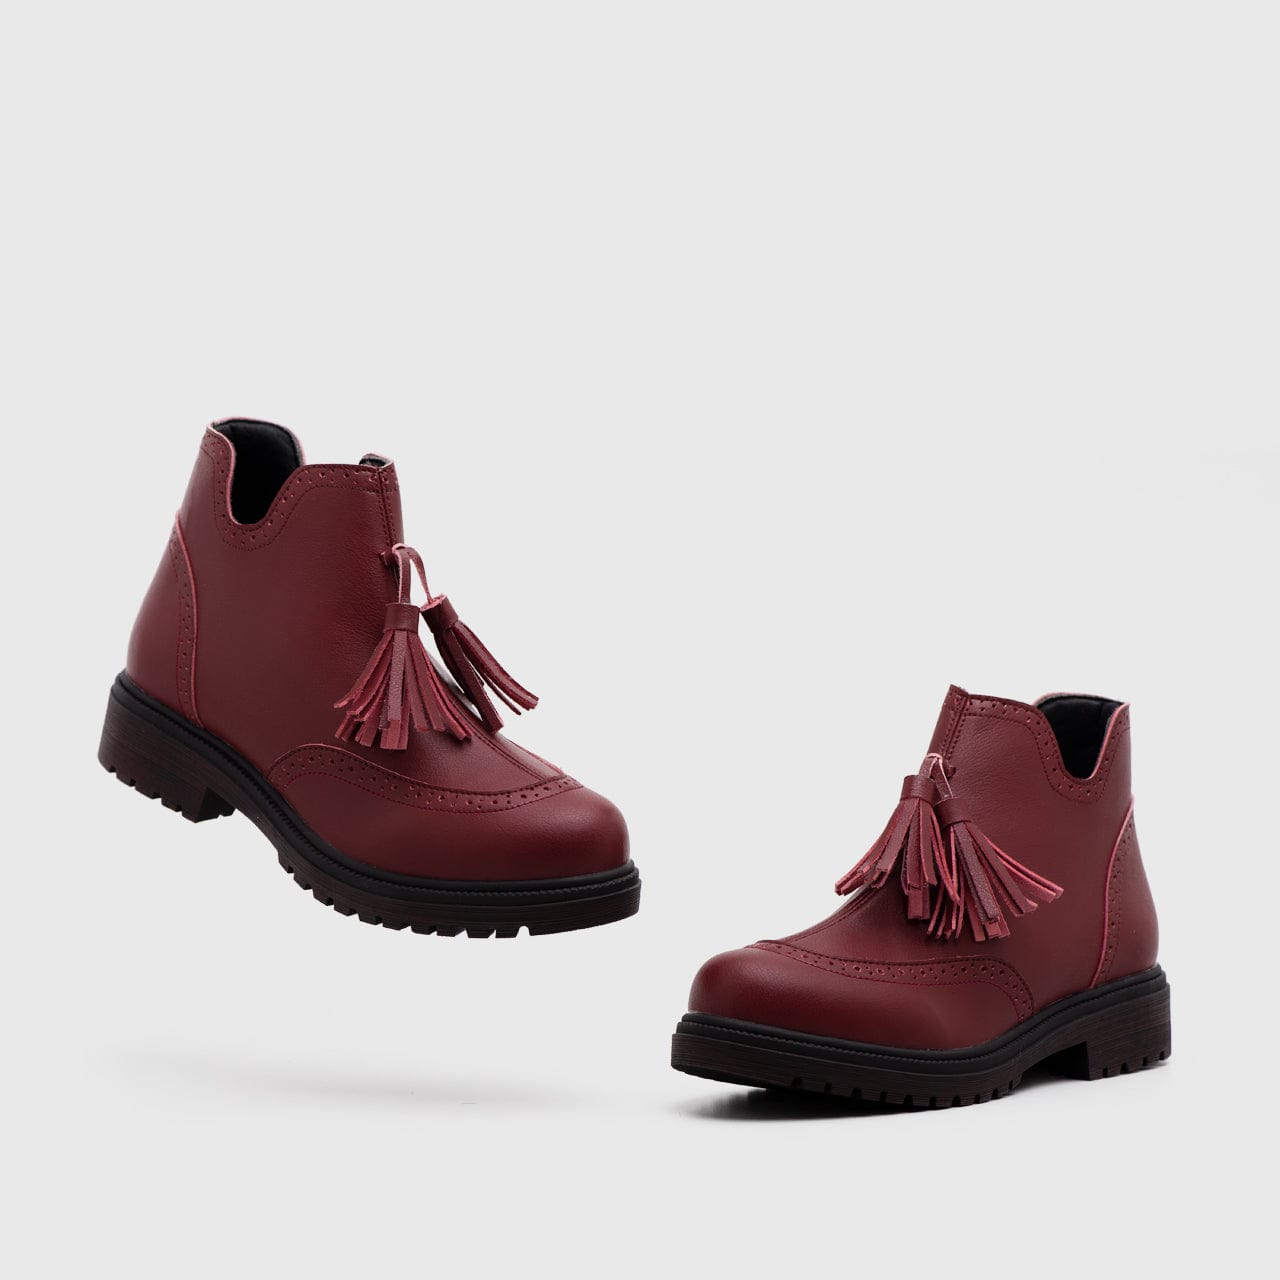 Adorable Projects Official Adorableprojects - Lorenza Boots Maroon - Sepatu Boots